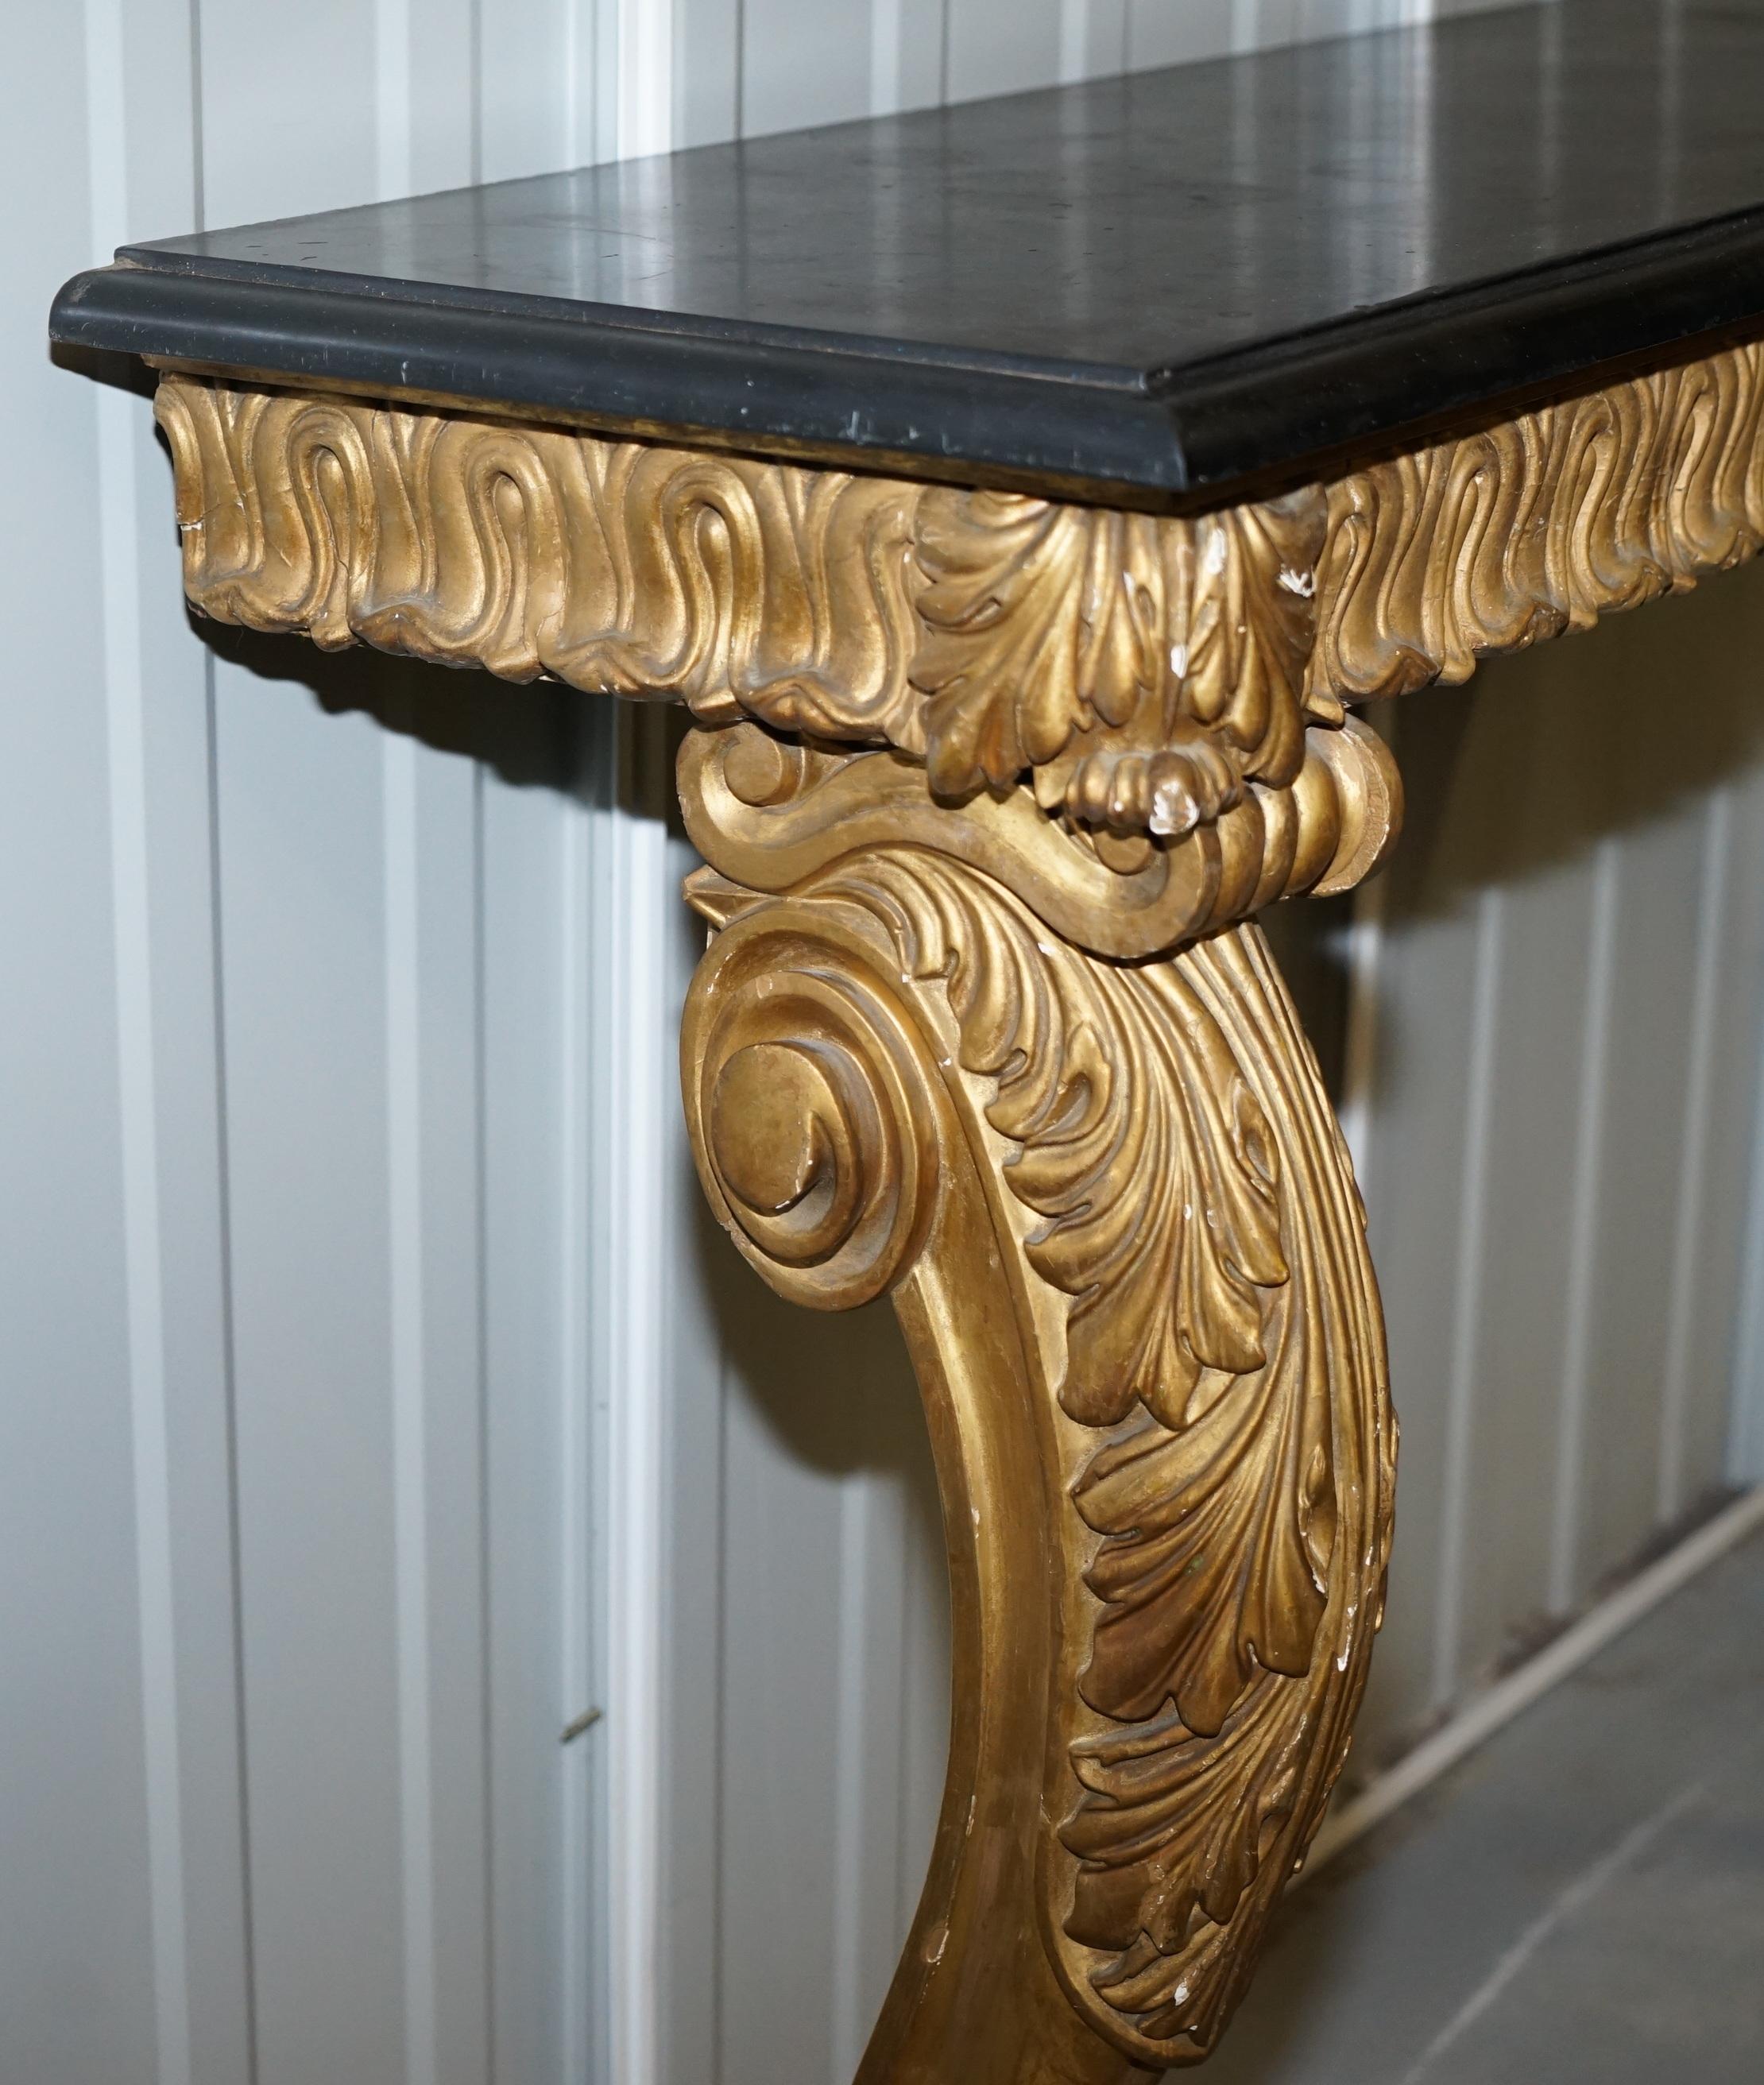 Rare Antique French Hand Carved Giltwood & Marble Console Table circa 1860 Paris For Sale 4